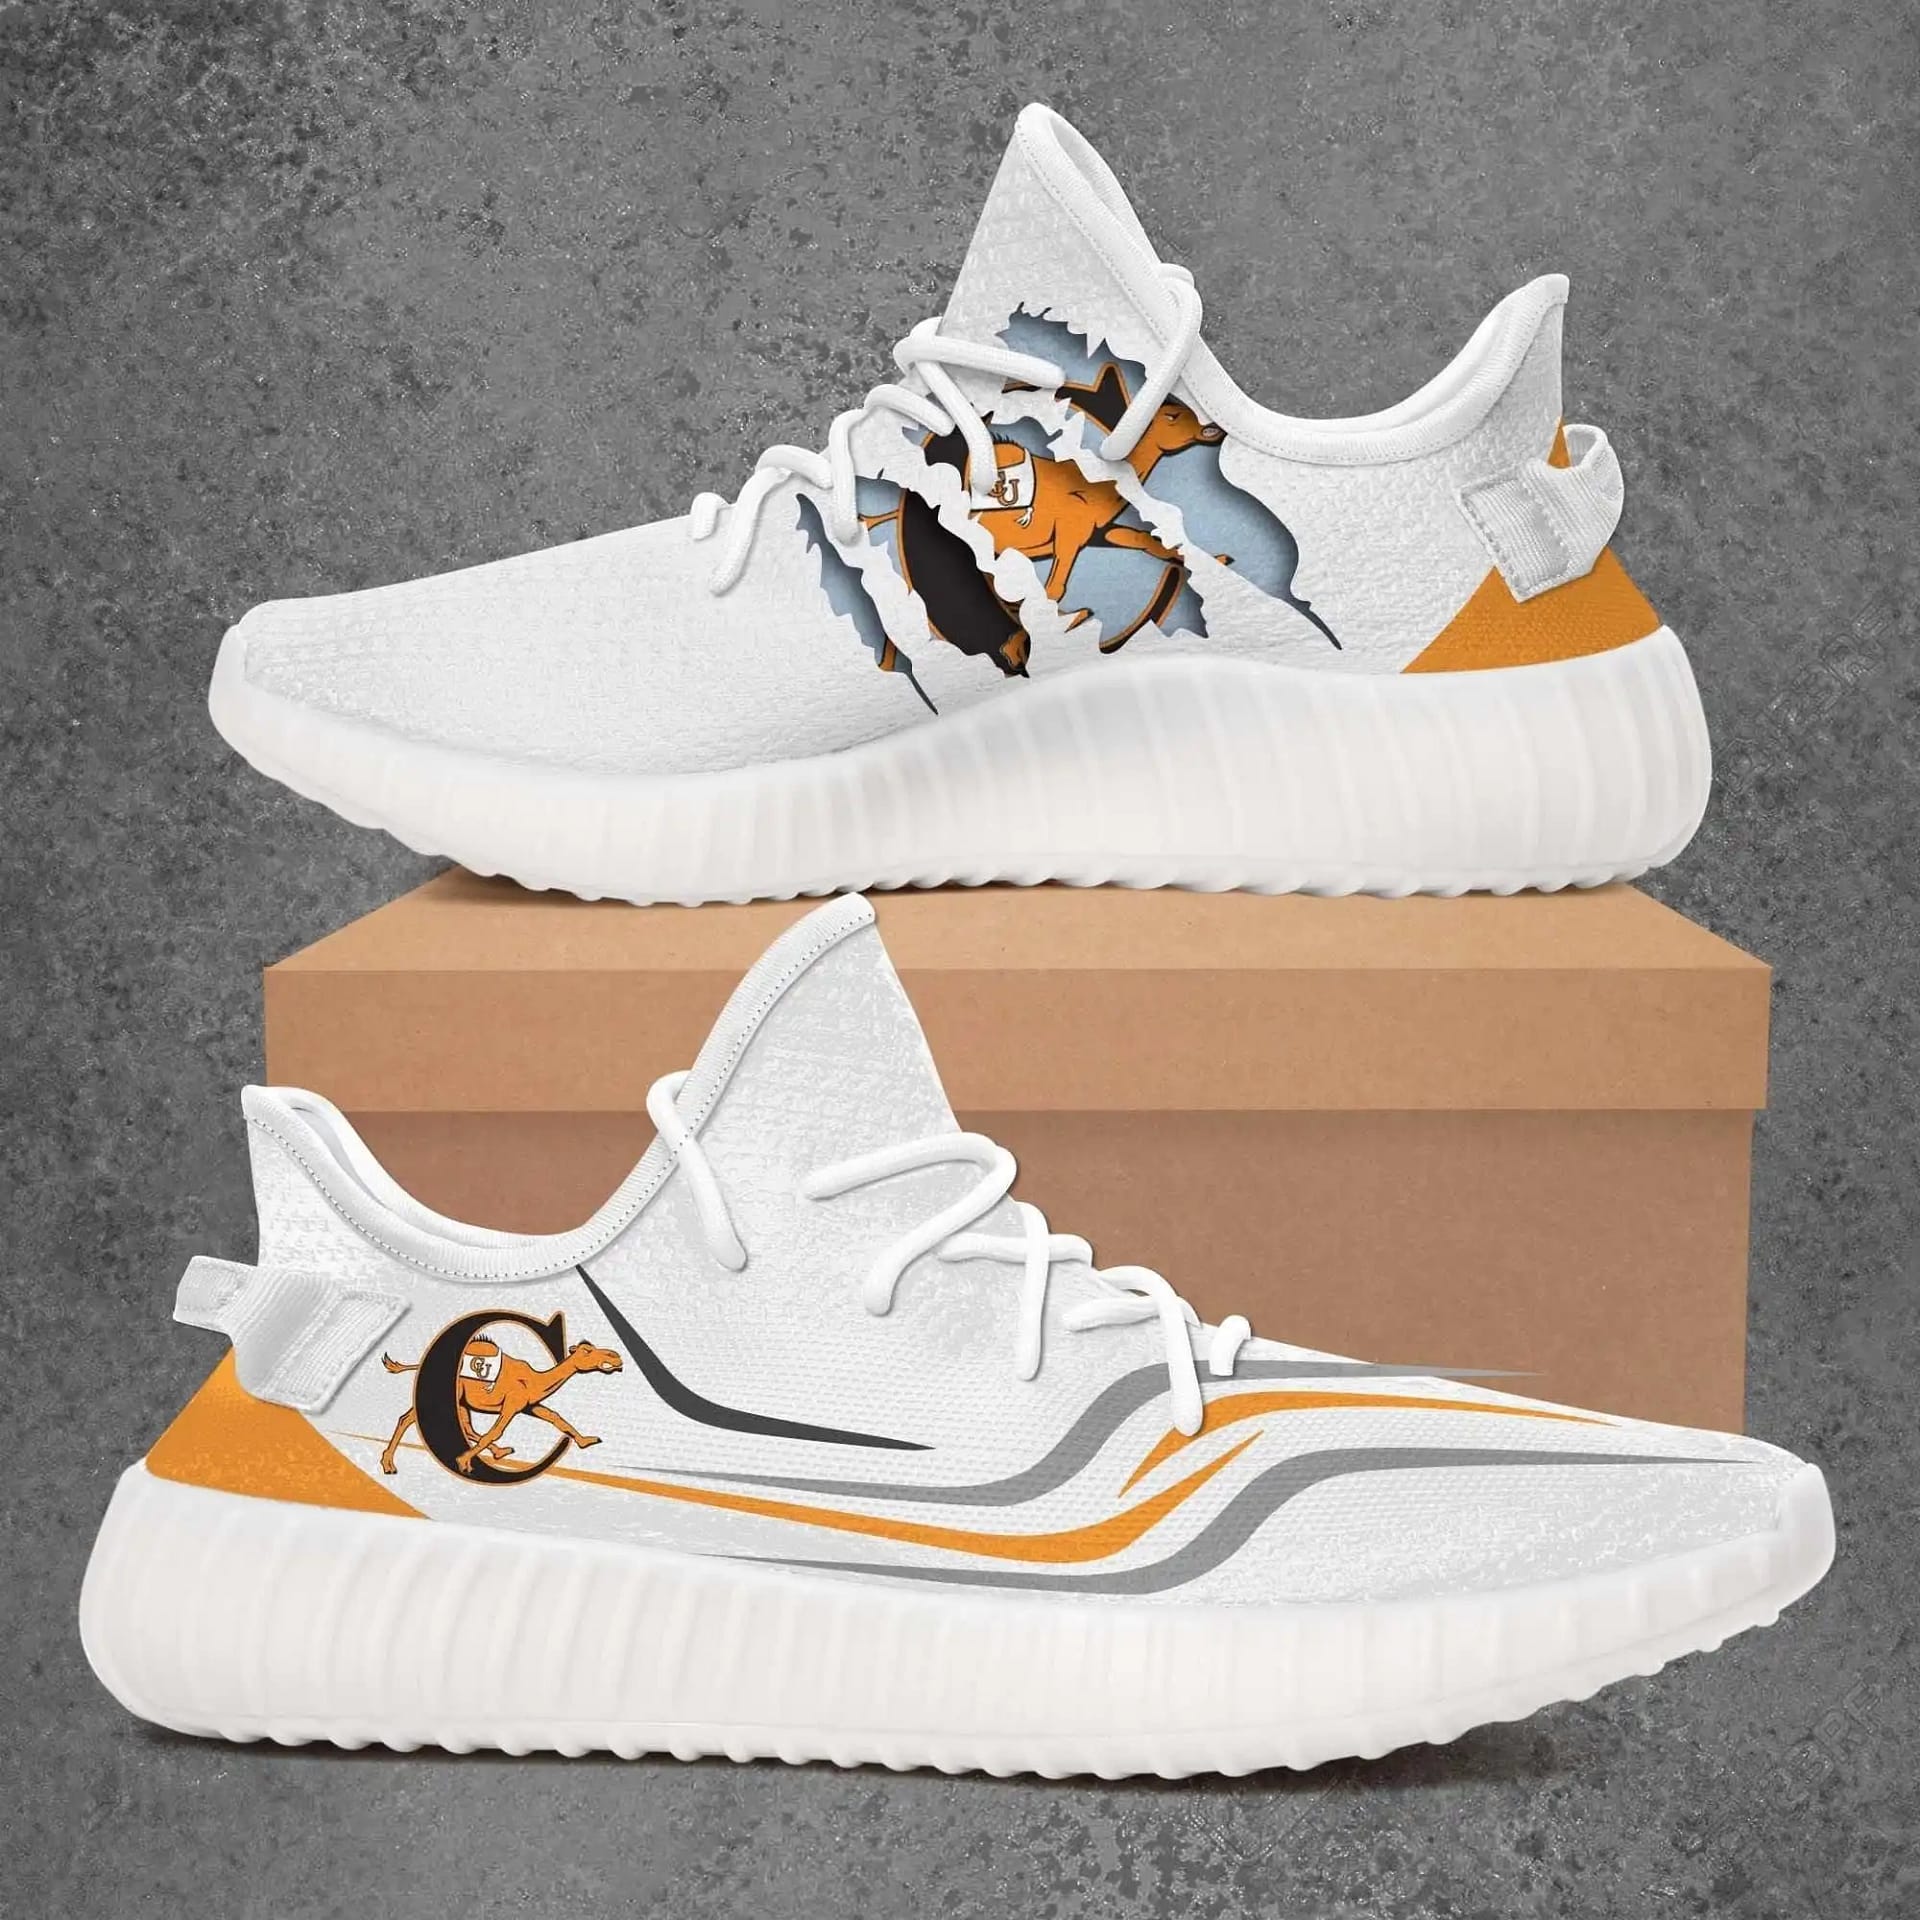 Campbell Fighting Camels Ncaa Yeezy Boost